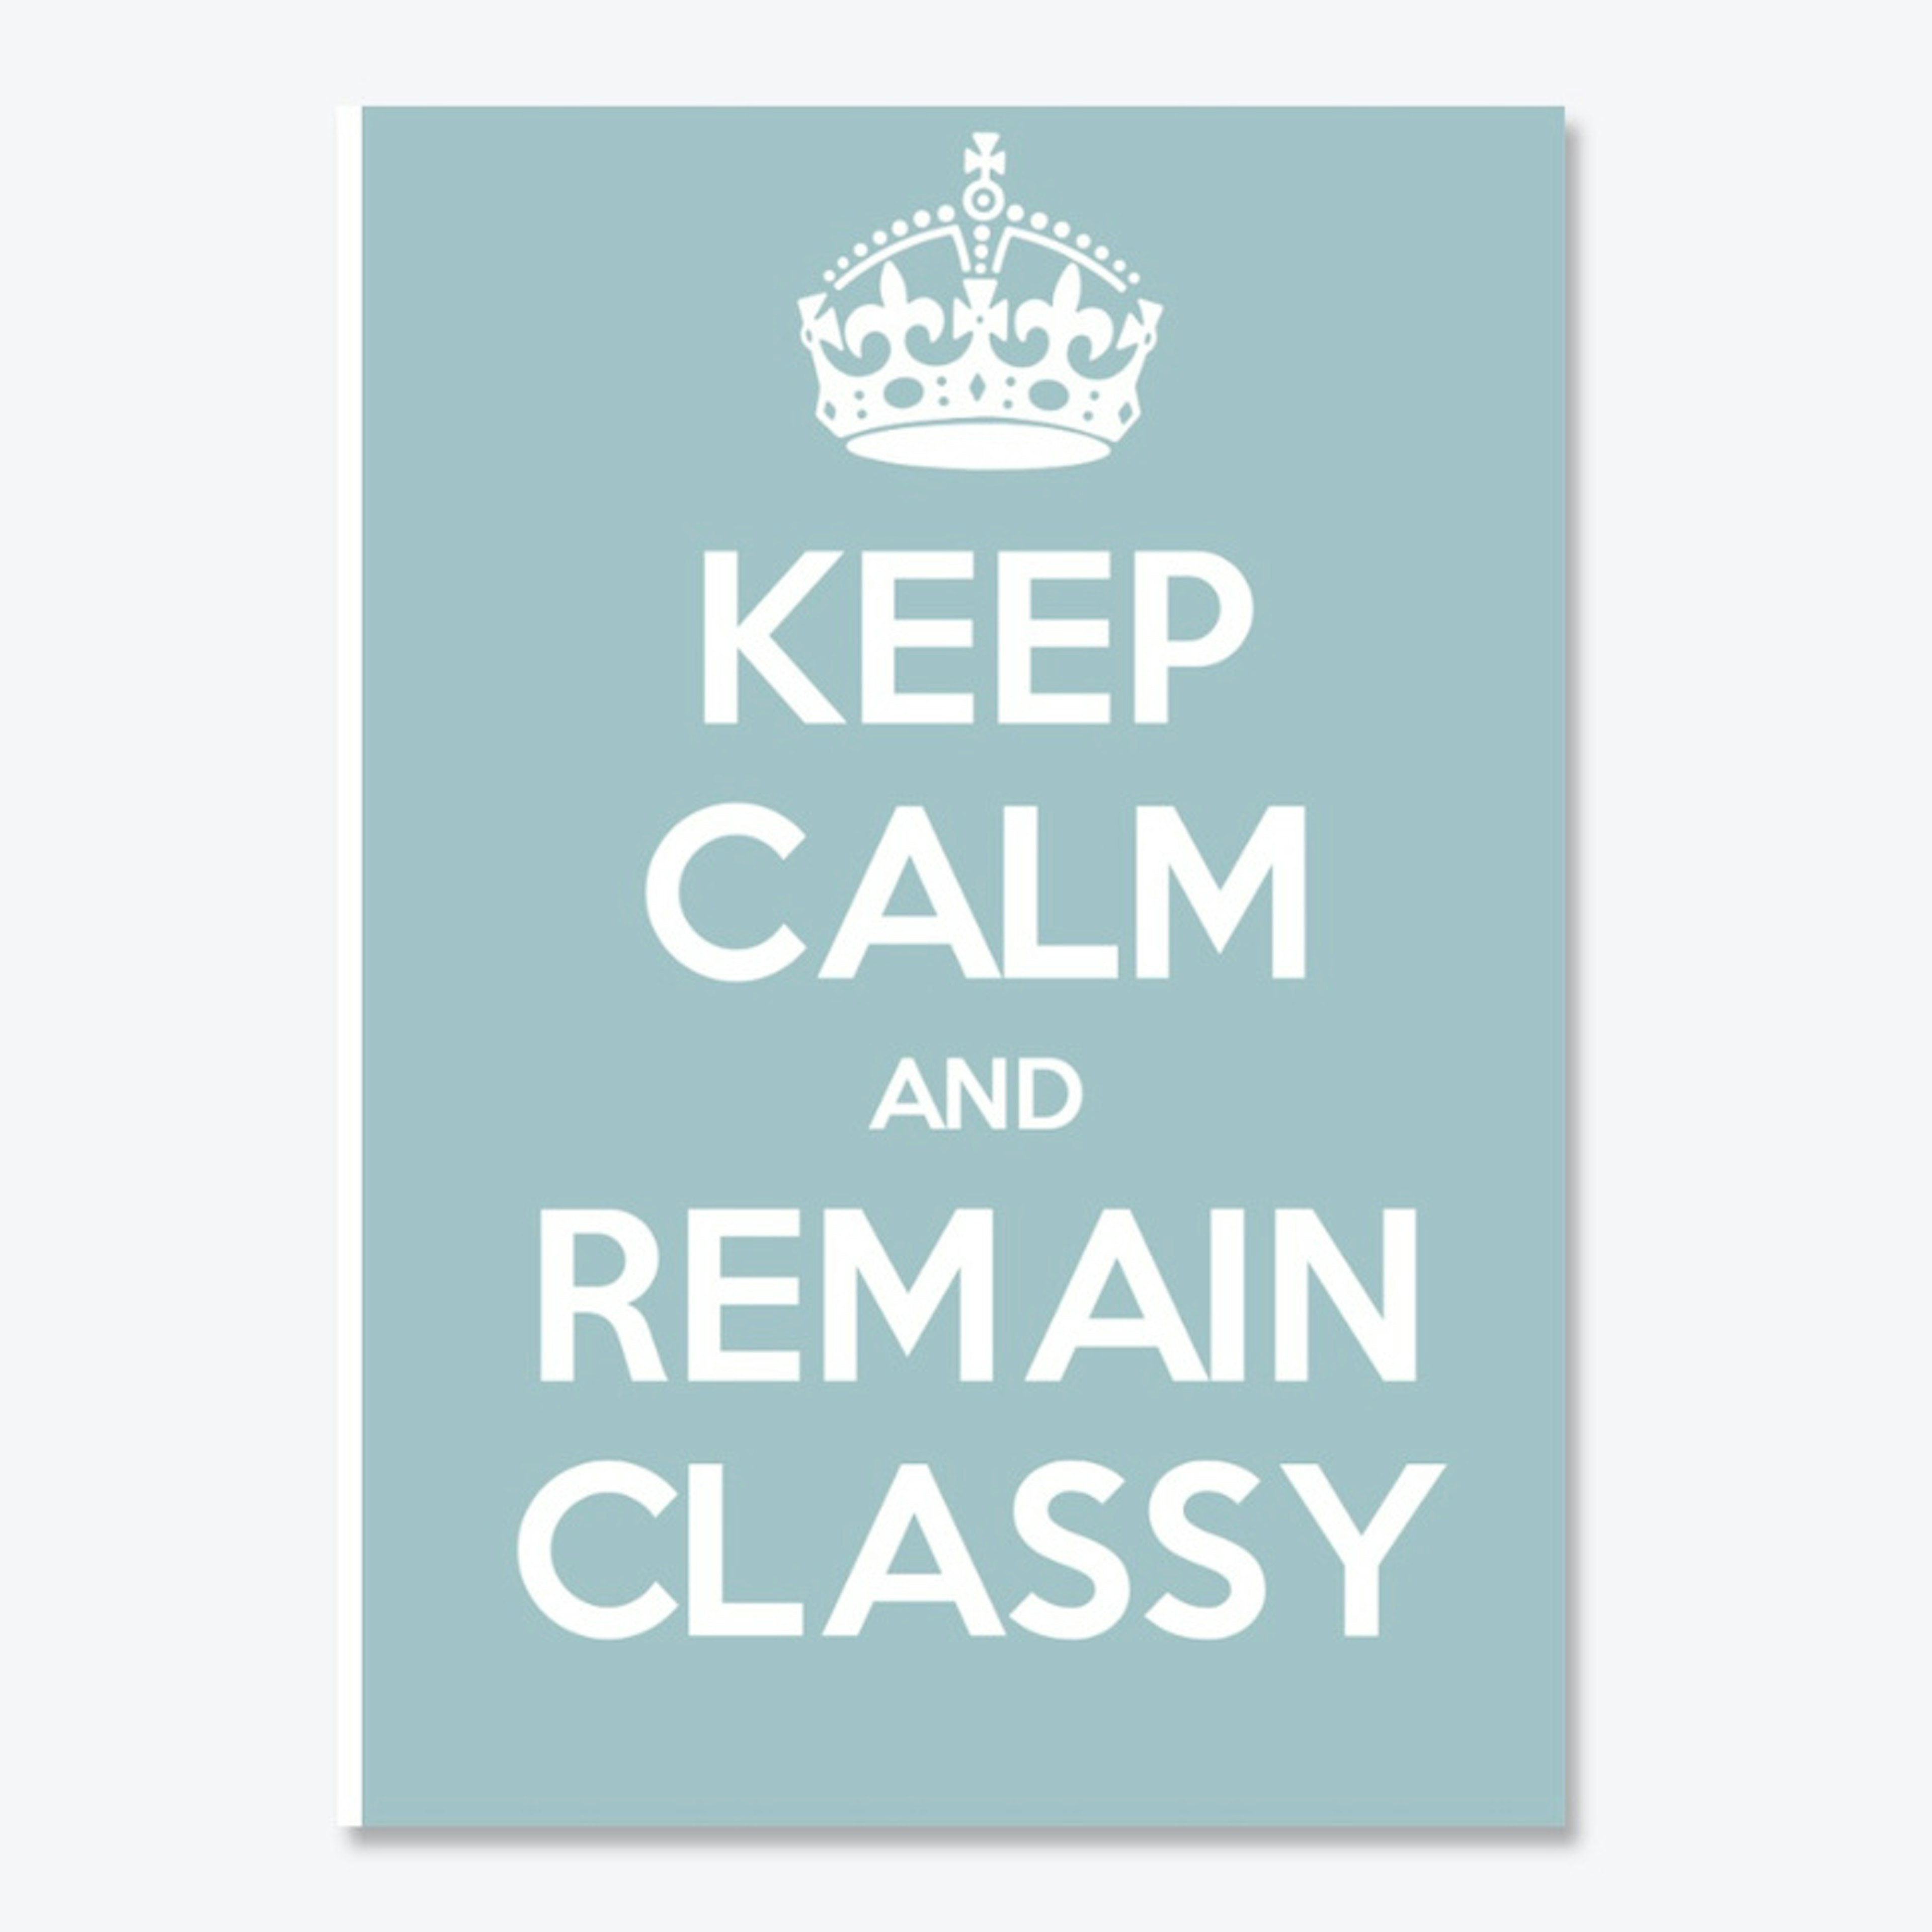 Keep Calm and Remain Classy Stickers